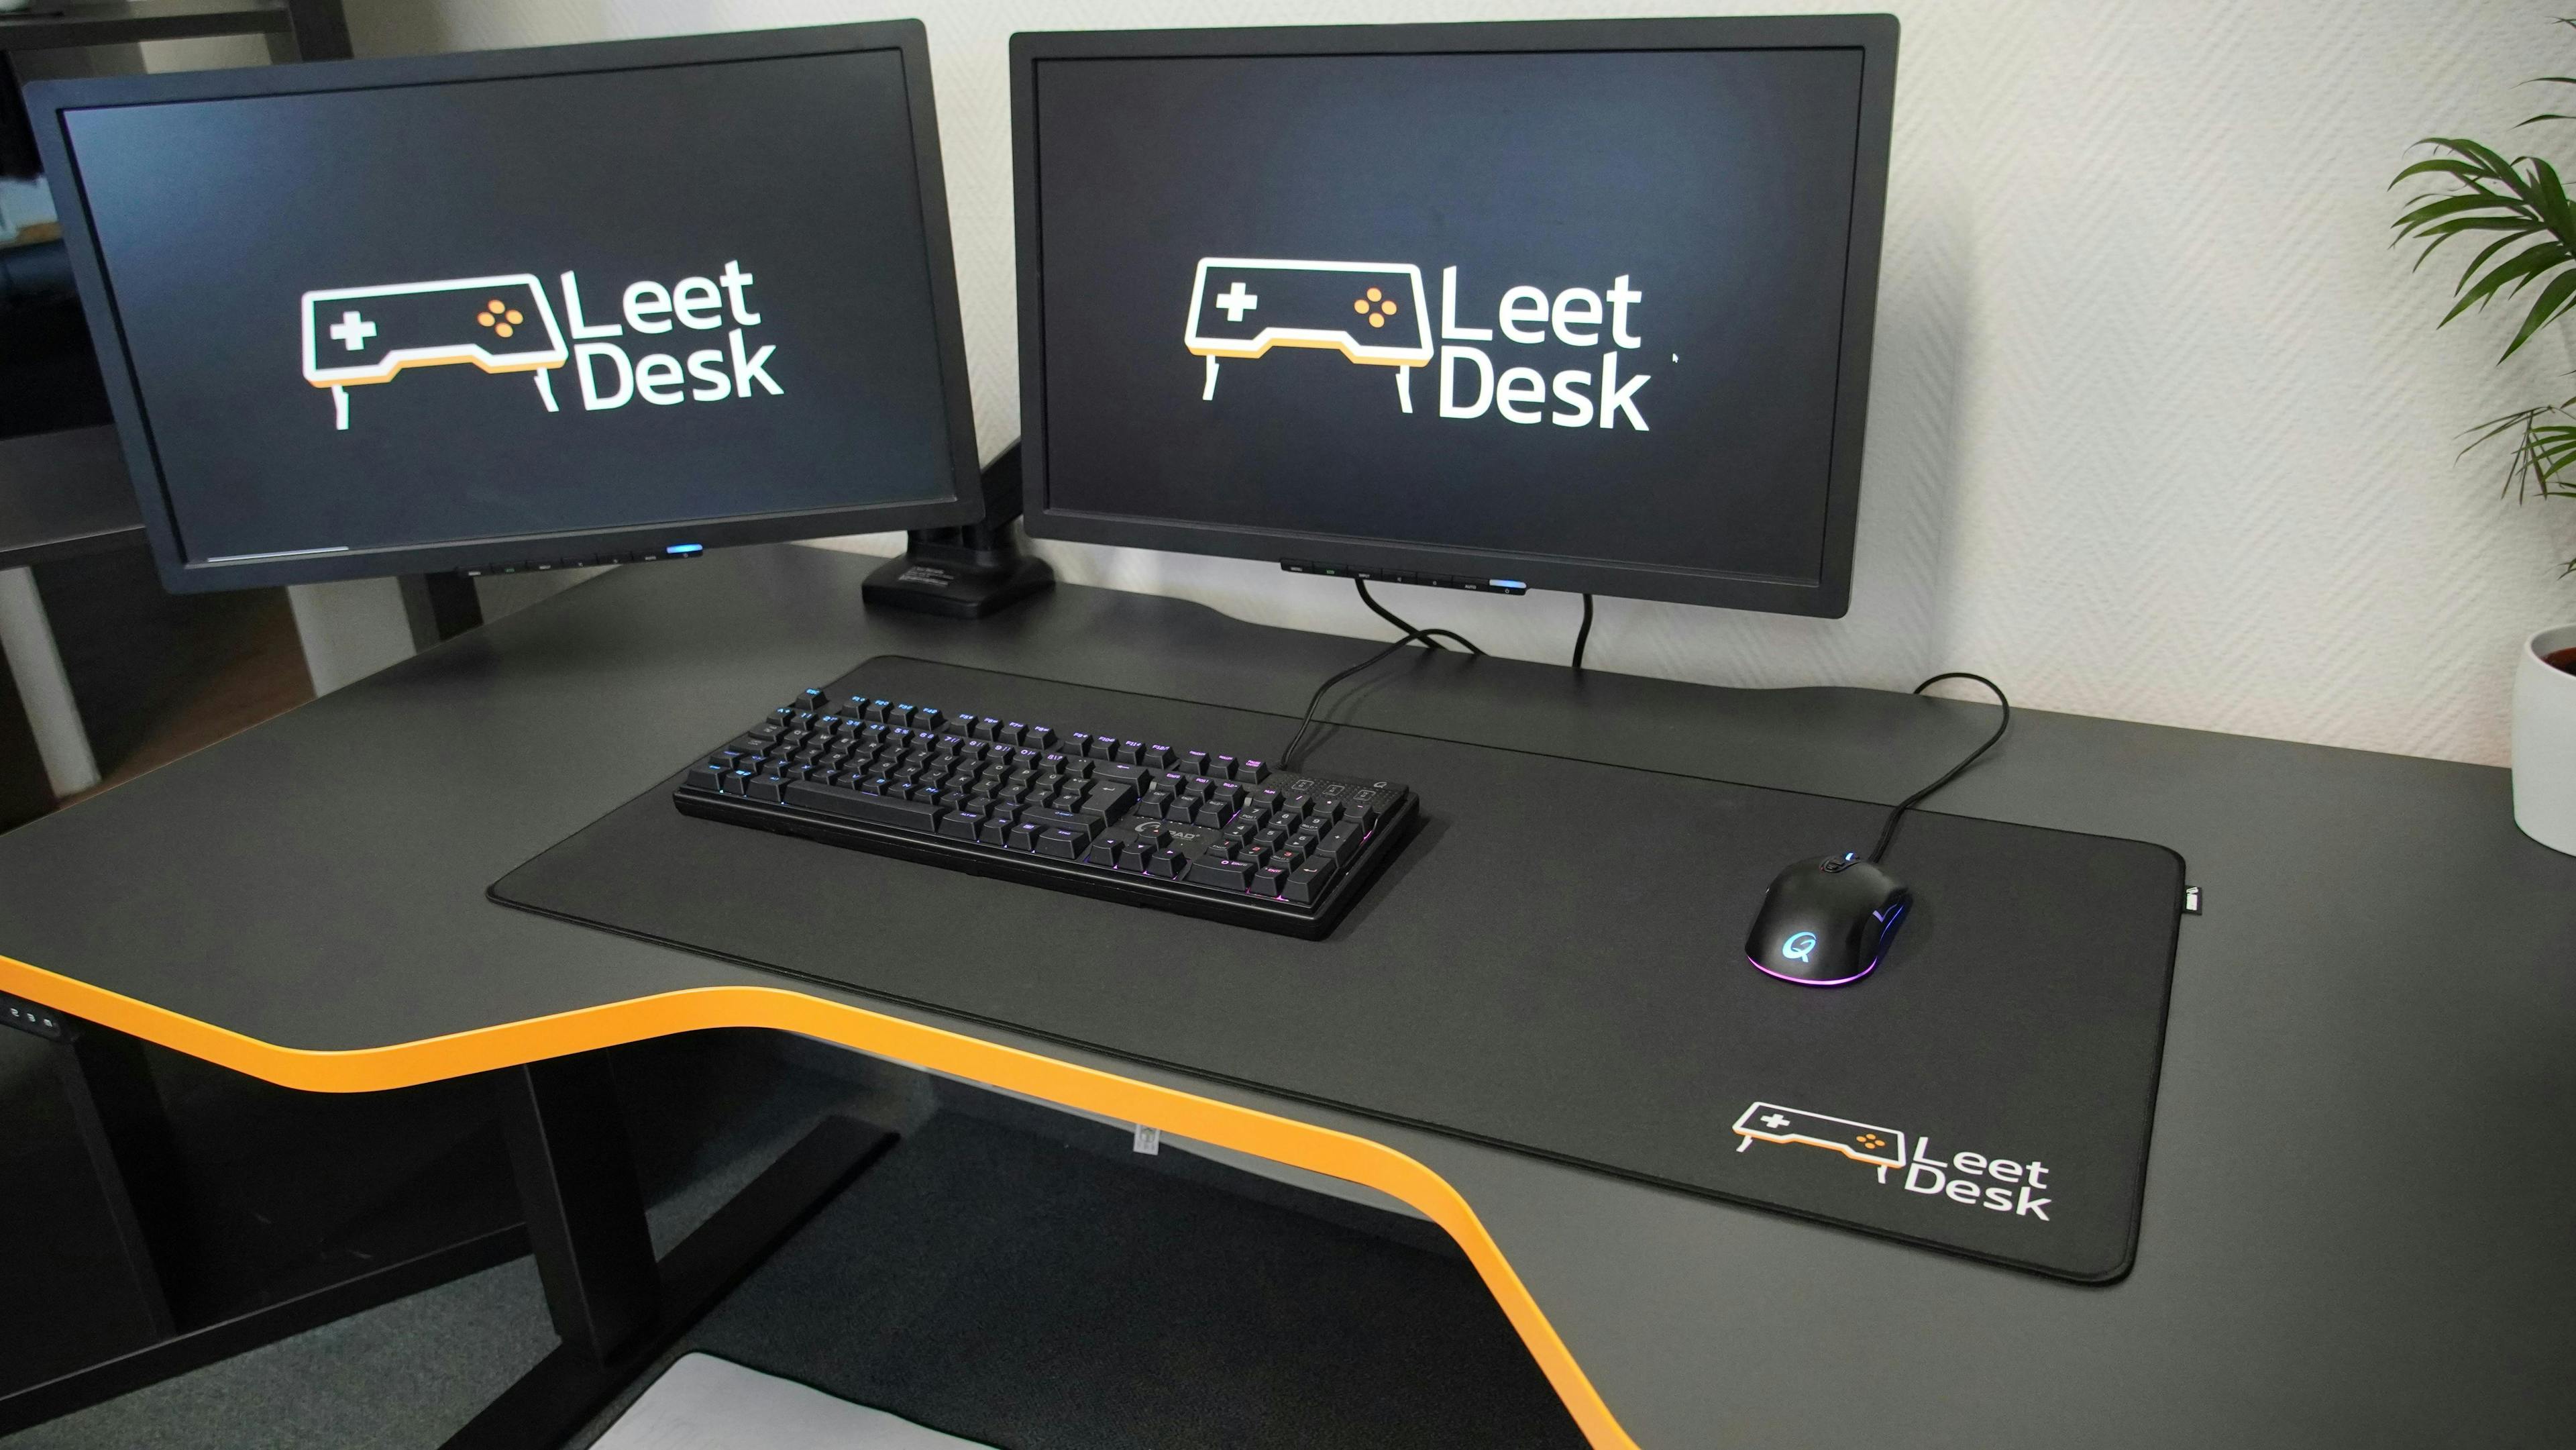 Some mouse pads take up almost the entire table | Credit: LeetDesk